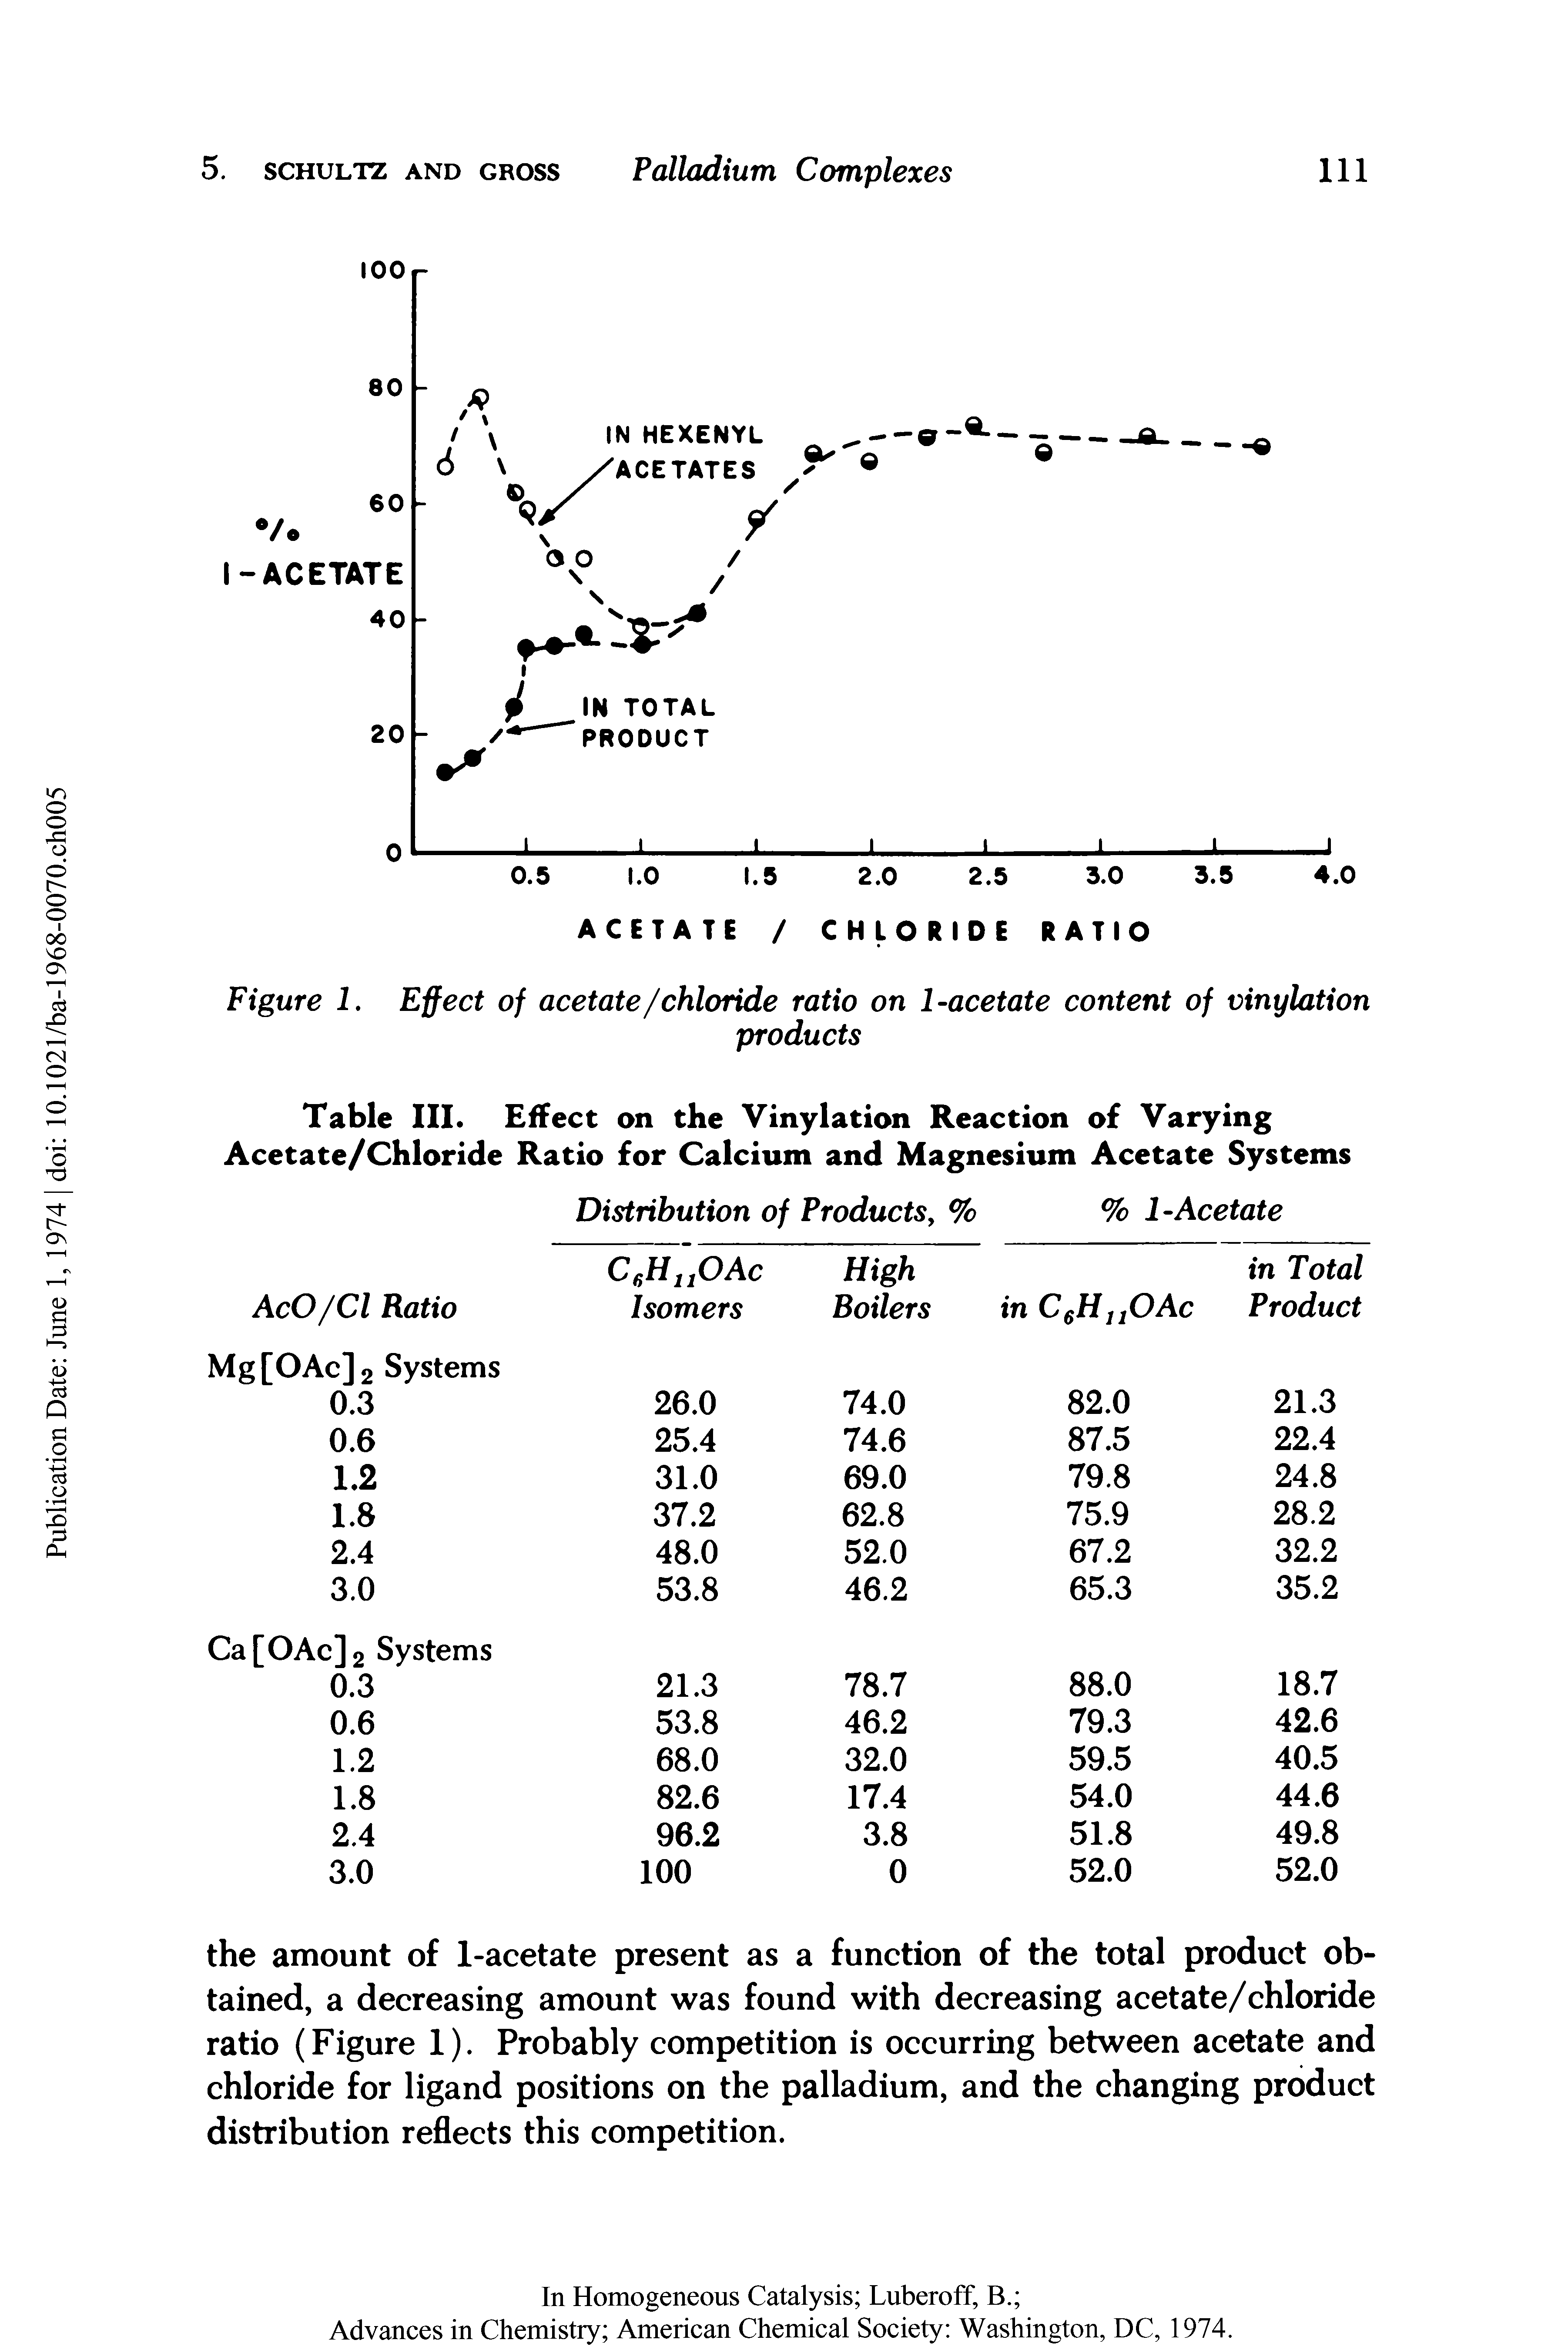 Table III. Effect on the Vinylation Reaction of Varying Acetate/Chloride Ratio for Calcium and Magnesium Acetate Systems...